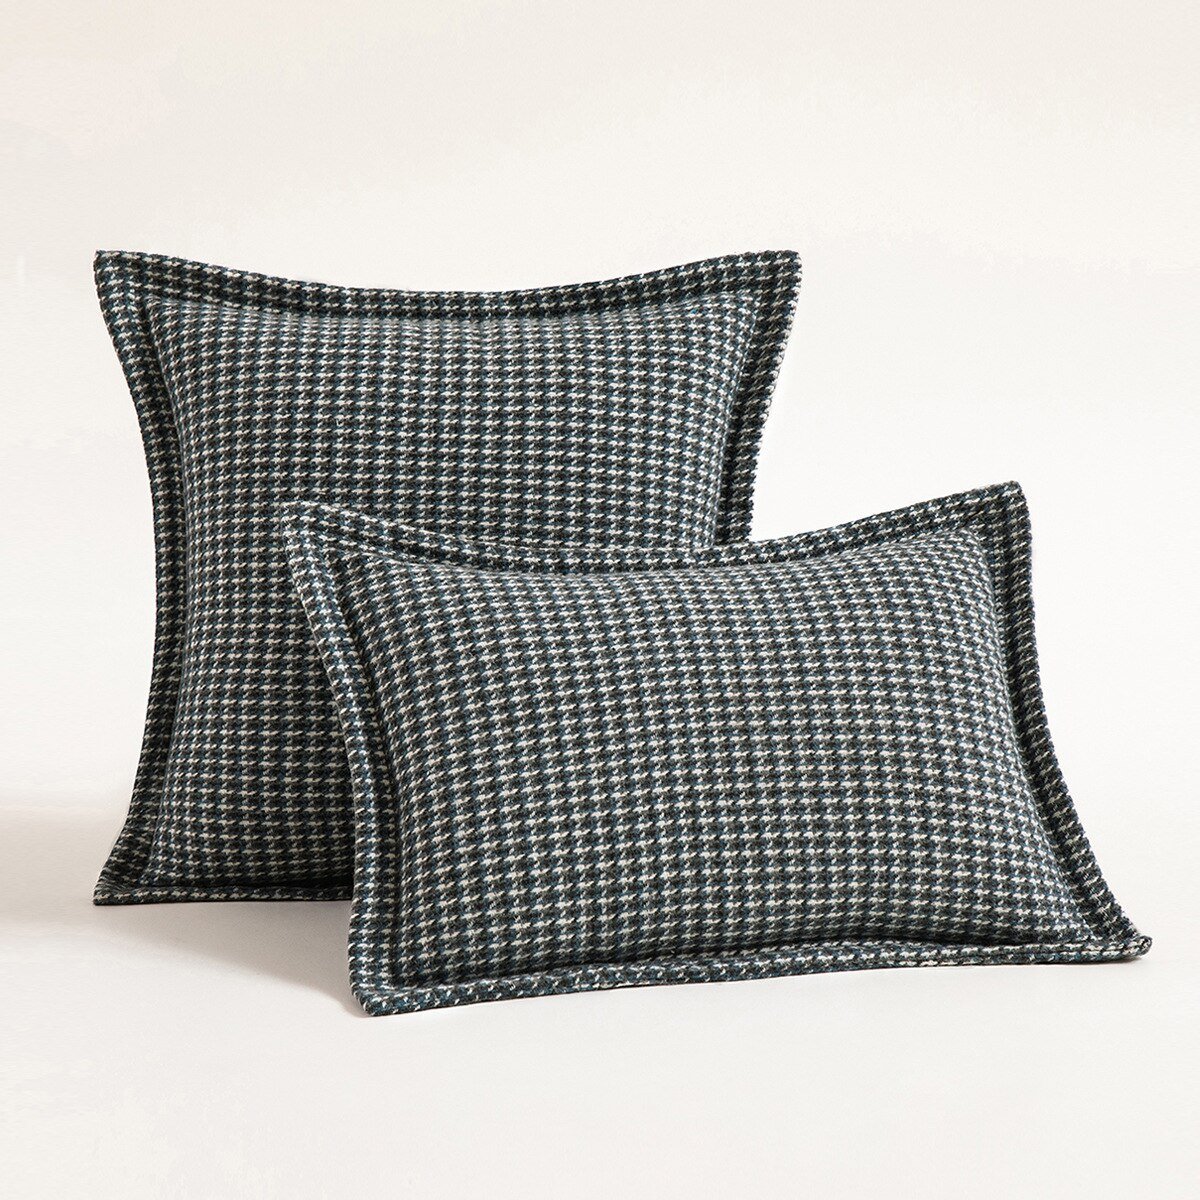 Valencia Cushion Cover - Charcoal - Buy Cushion Cover Online at FRANKY'S